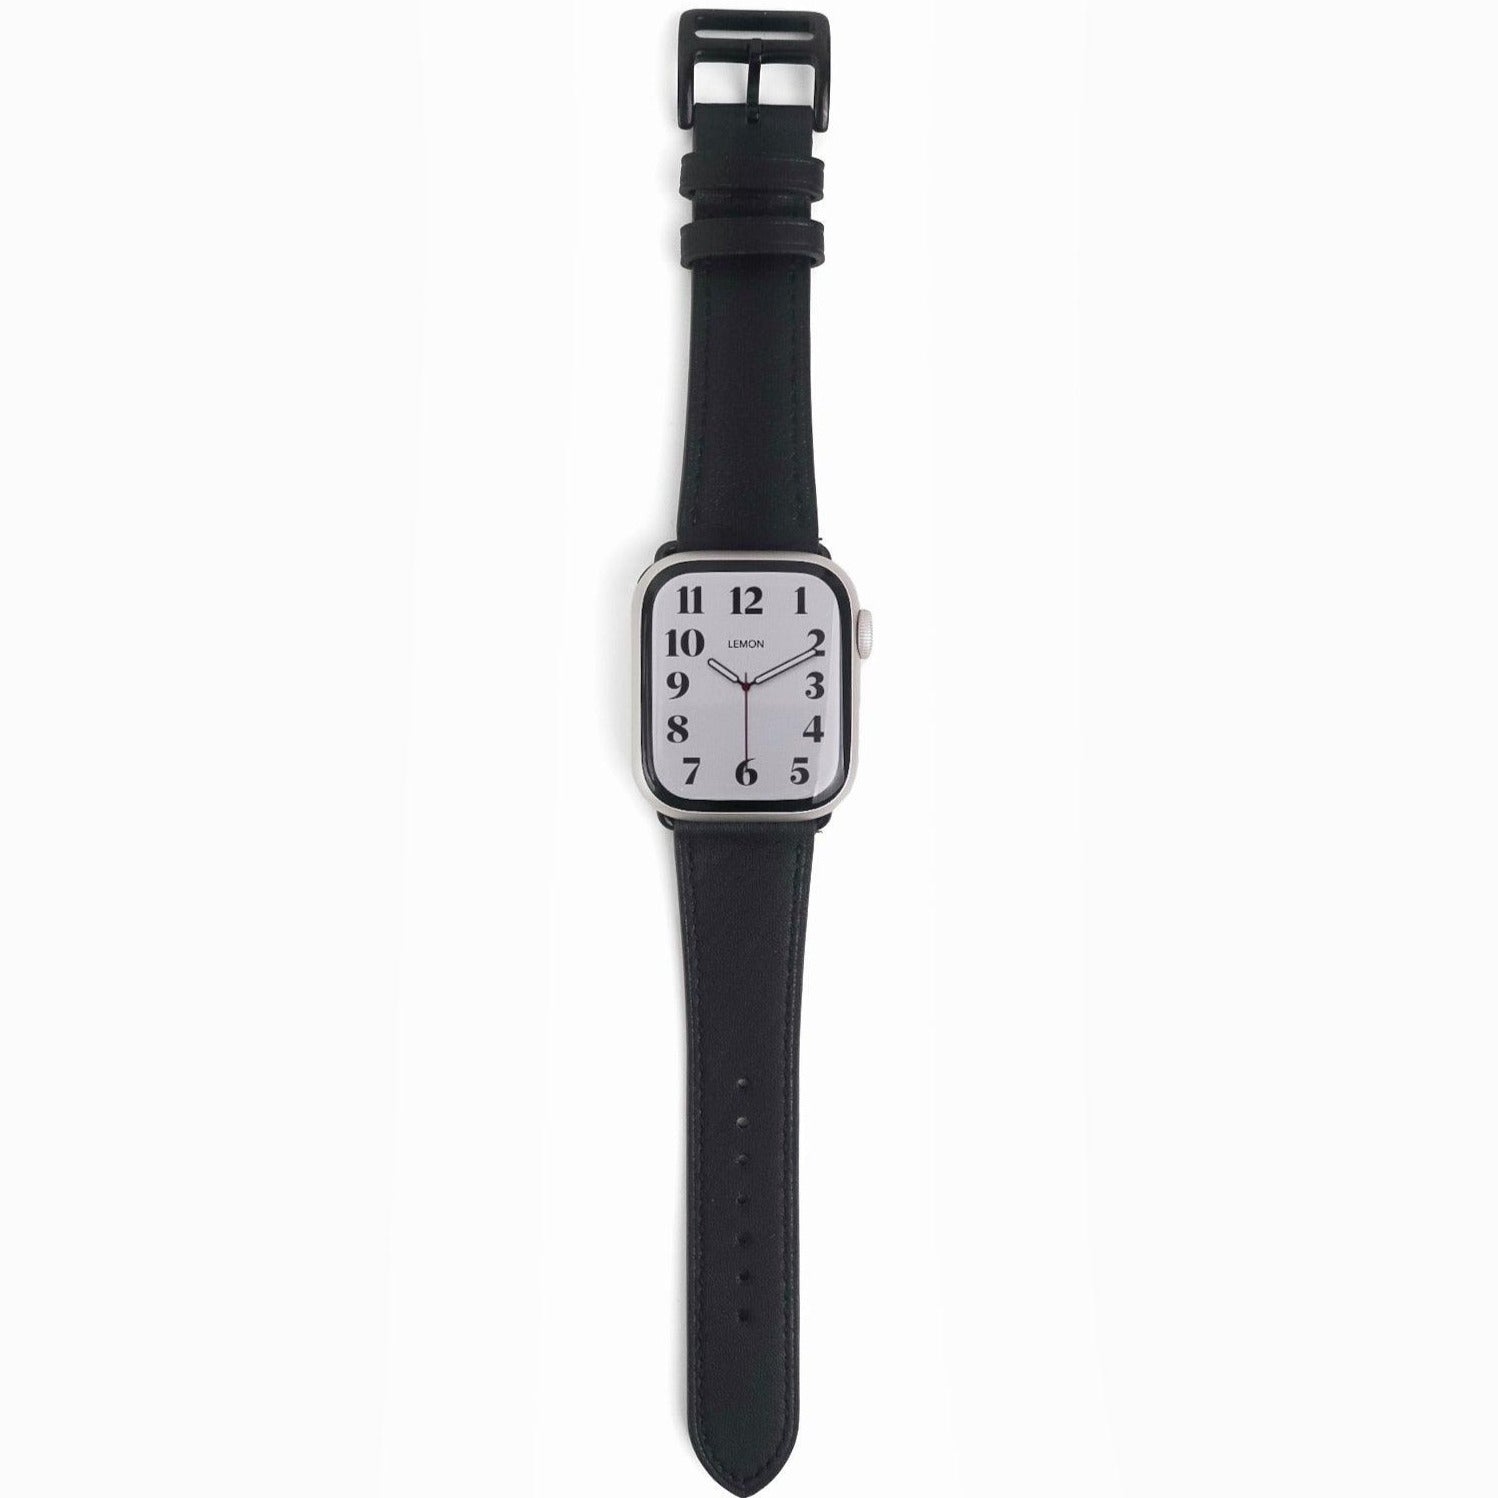 Florence Apple Watch Band - Black